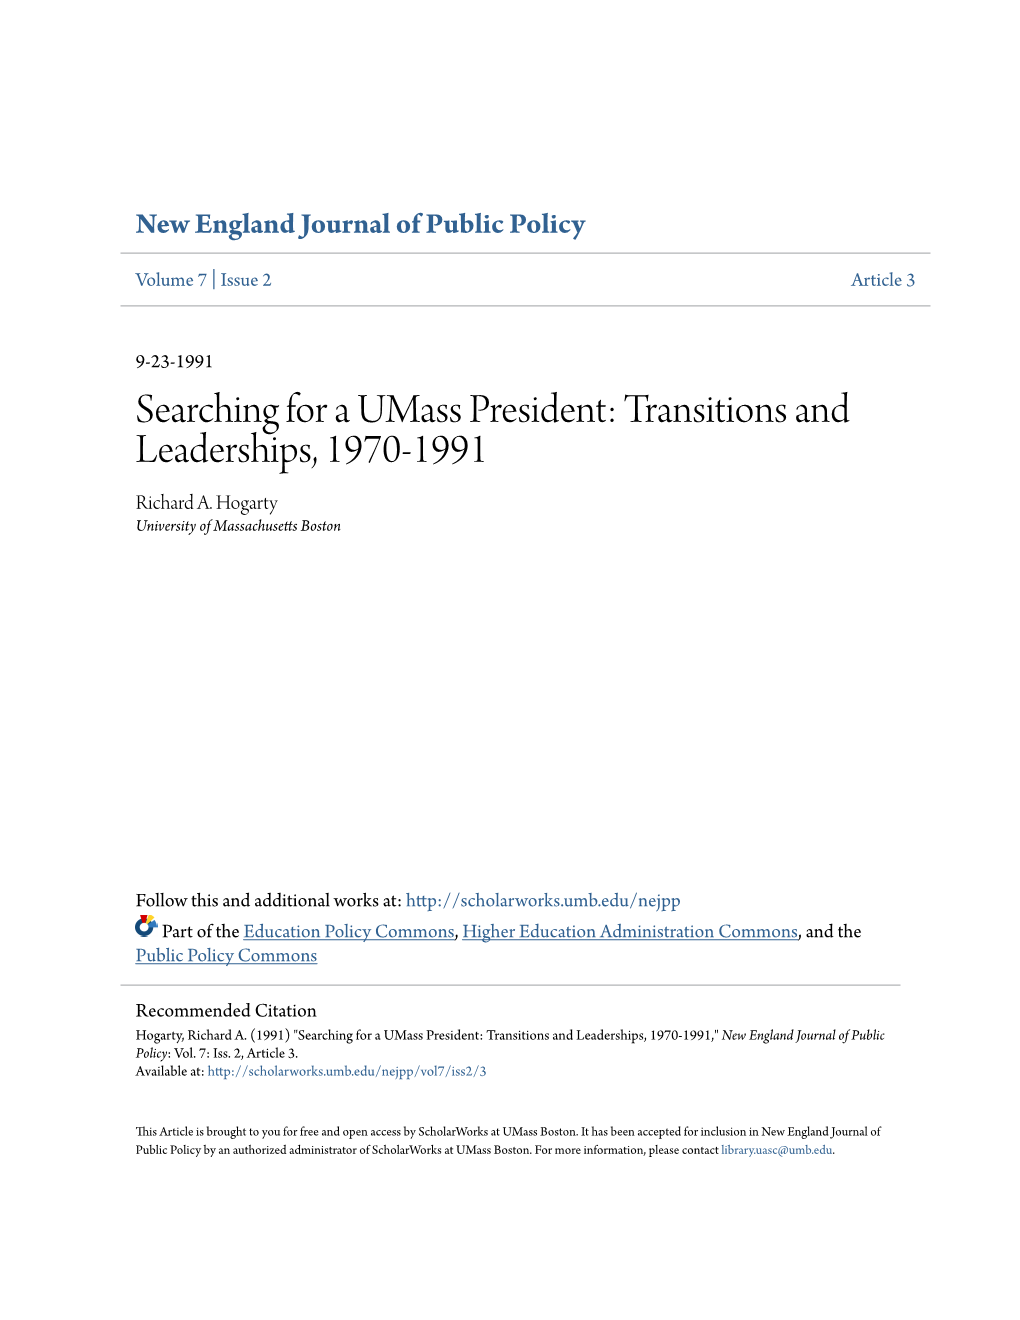 Searching for a Umass President: Transitions and Leaderships, 1970-1991 Richard A